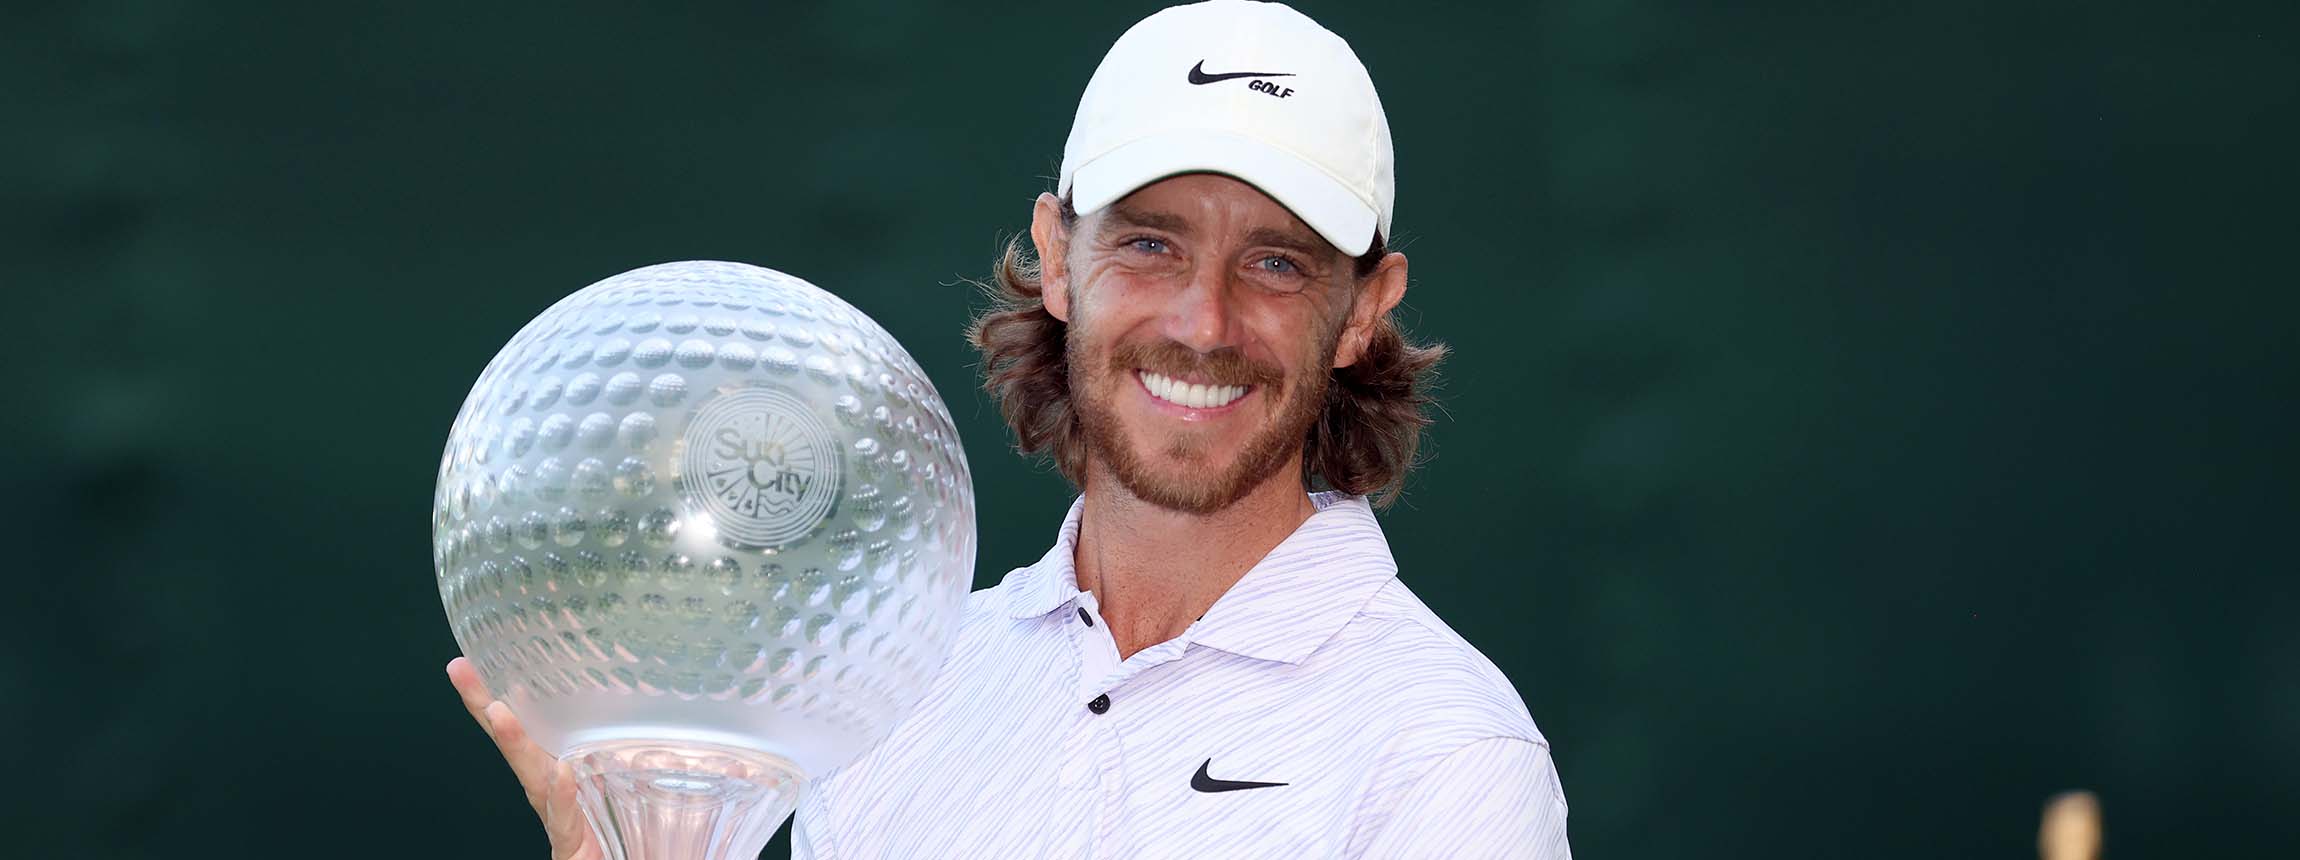 Tommy fleetwood with sun city trophy